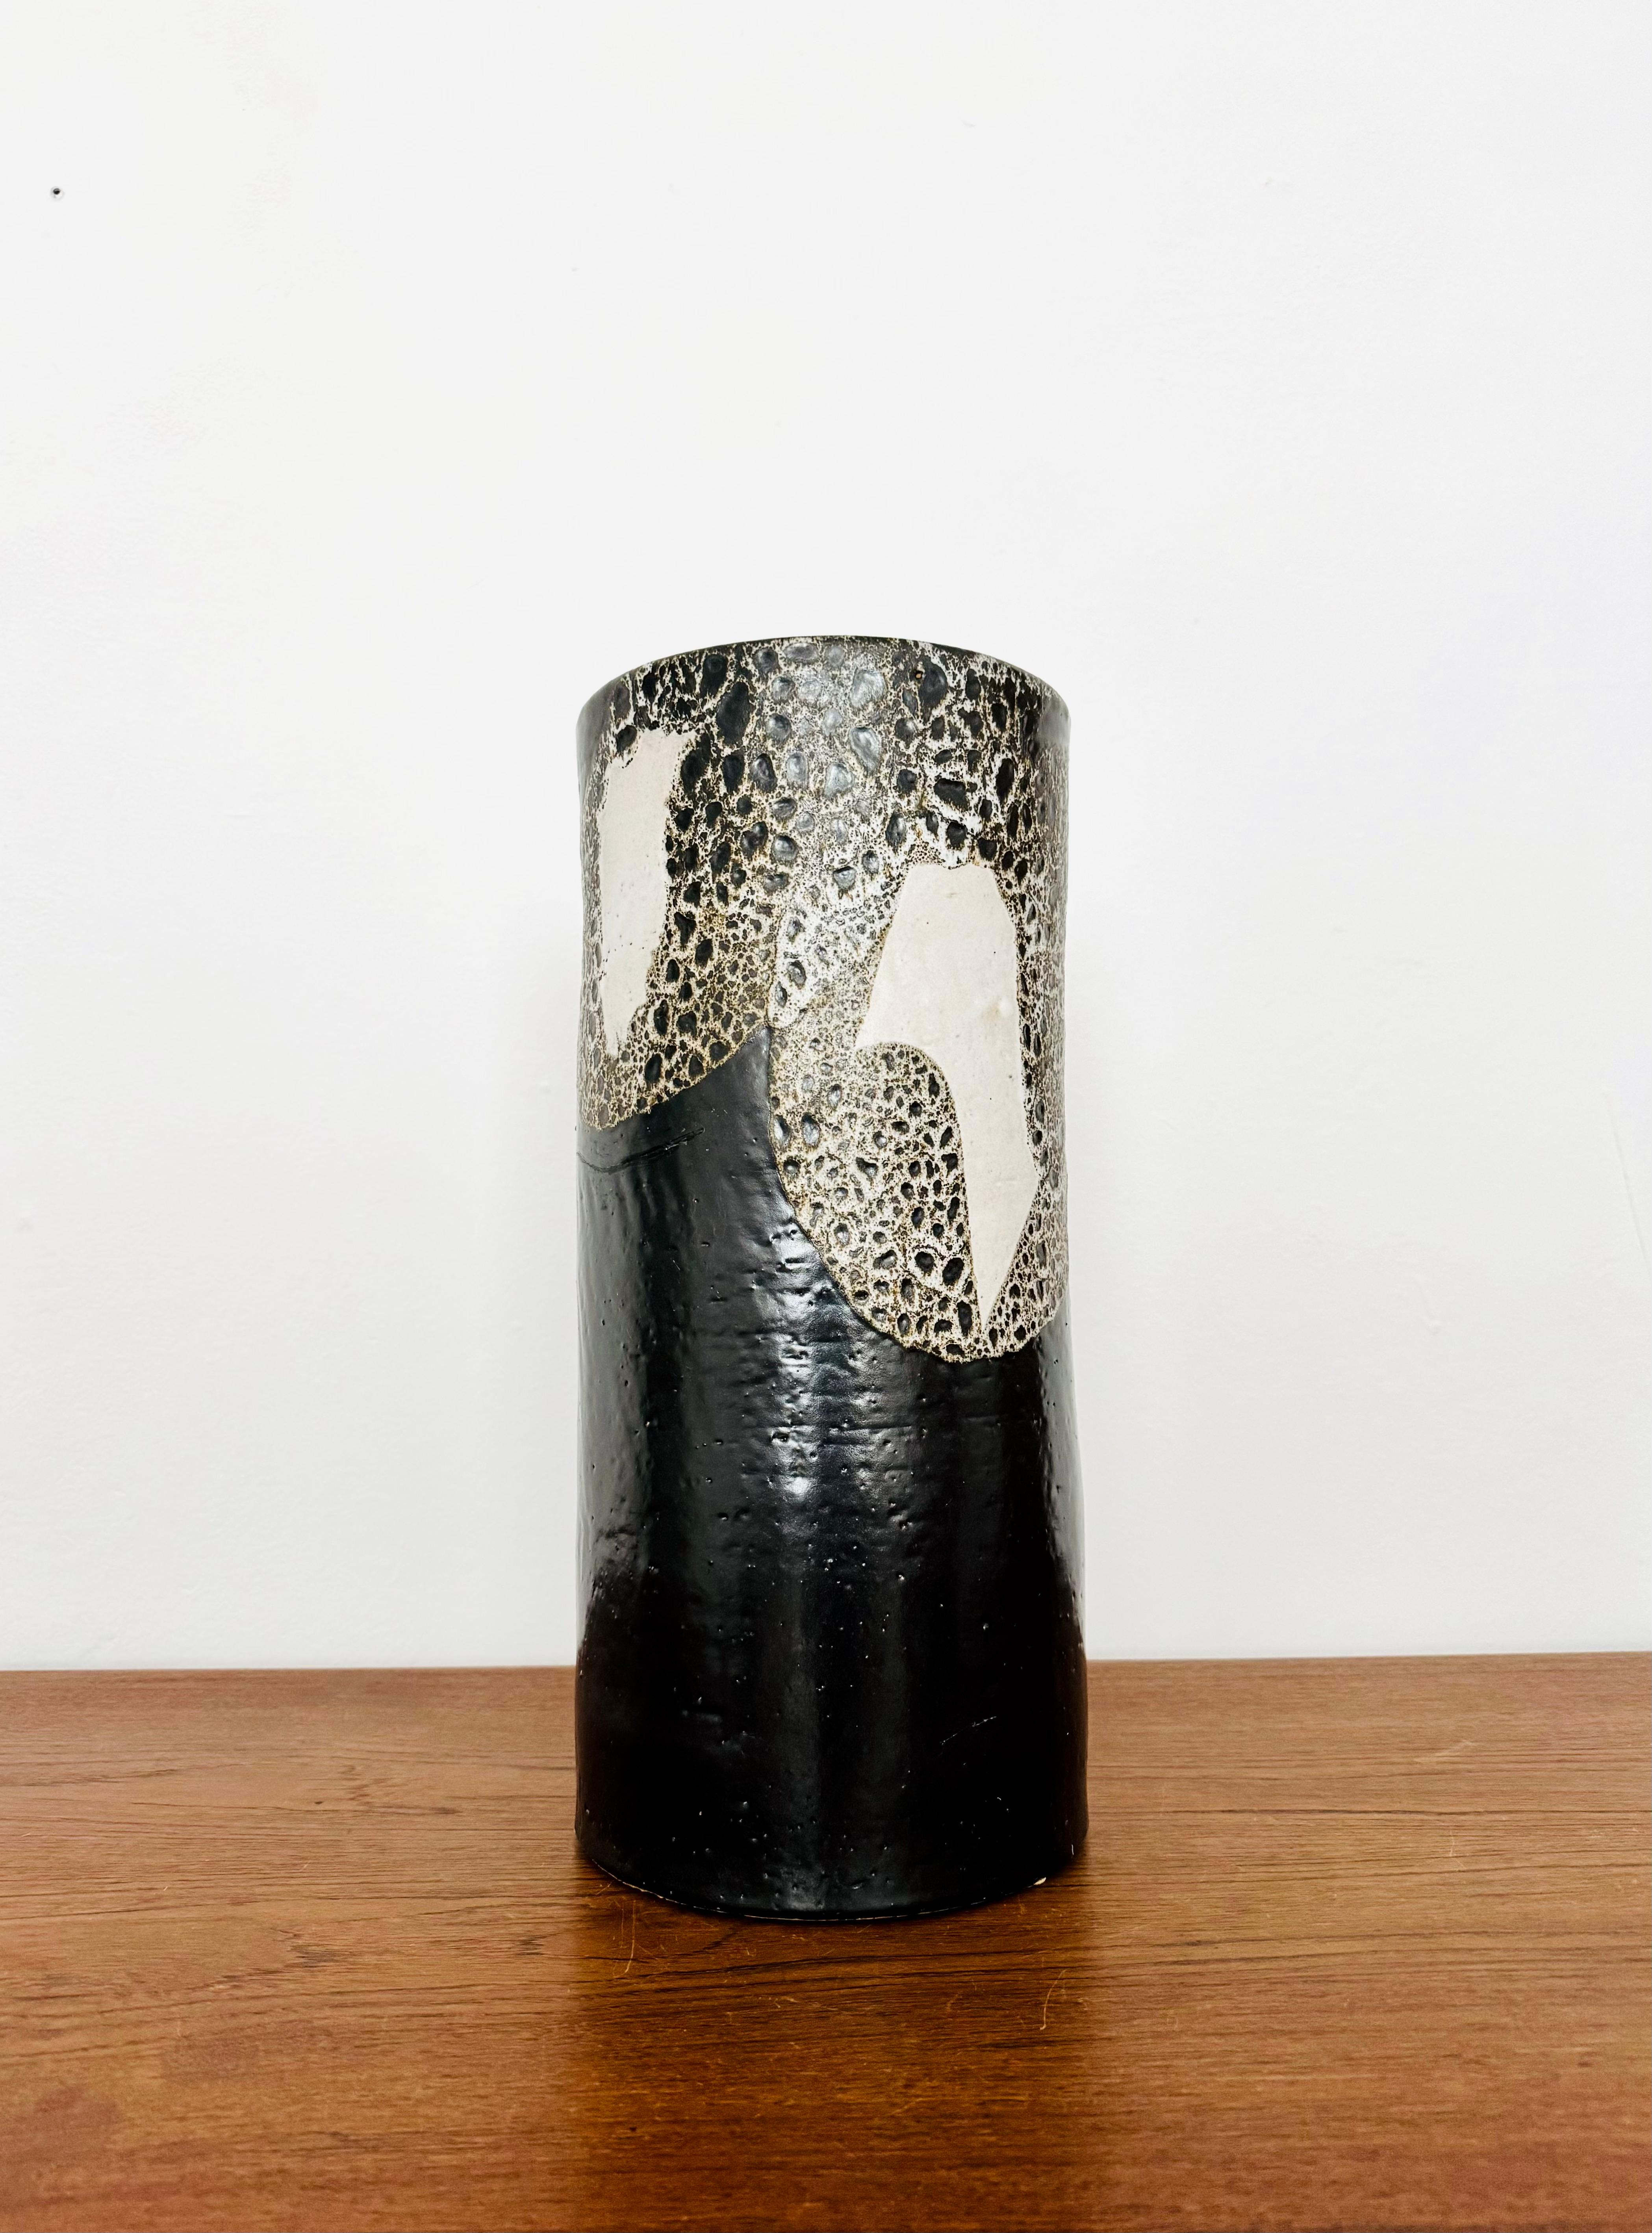 Stunning artist ceramic table lamp from the 1960s.
The lamp has a great structure and is wonderfully designed.
Very high quality workmanship and fantastic design.
A spectacular play of light is created.

Condition:

Very good vintage condition with